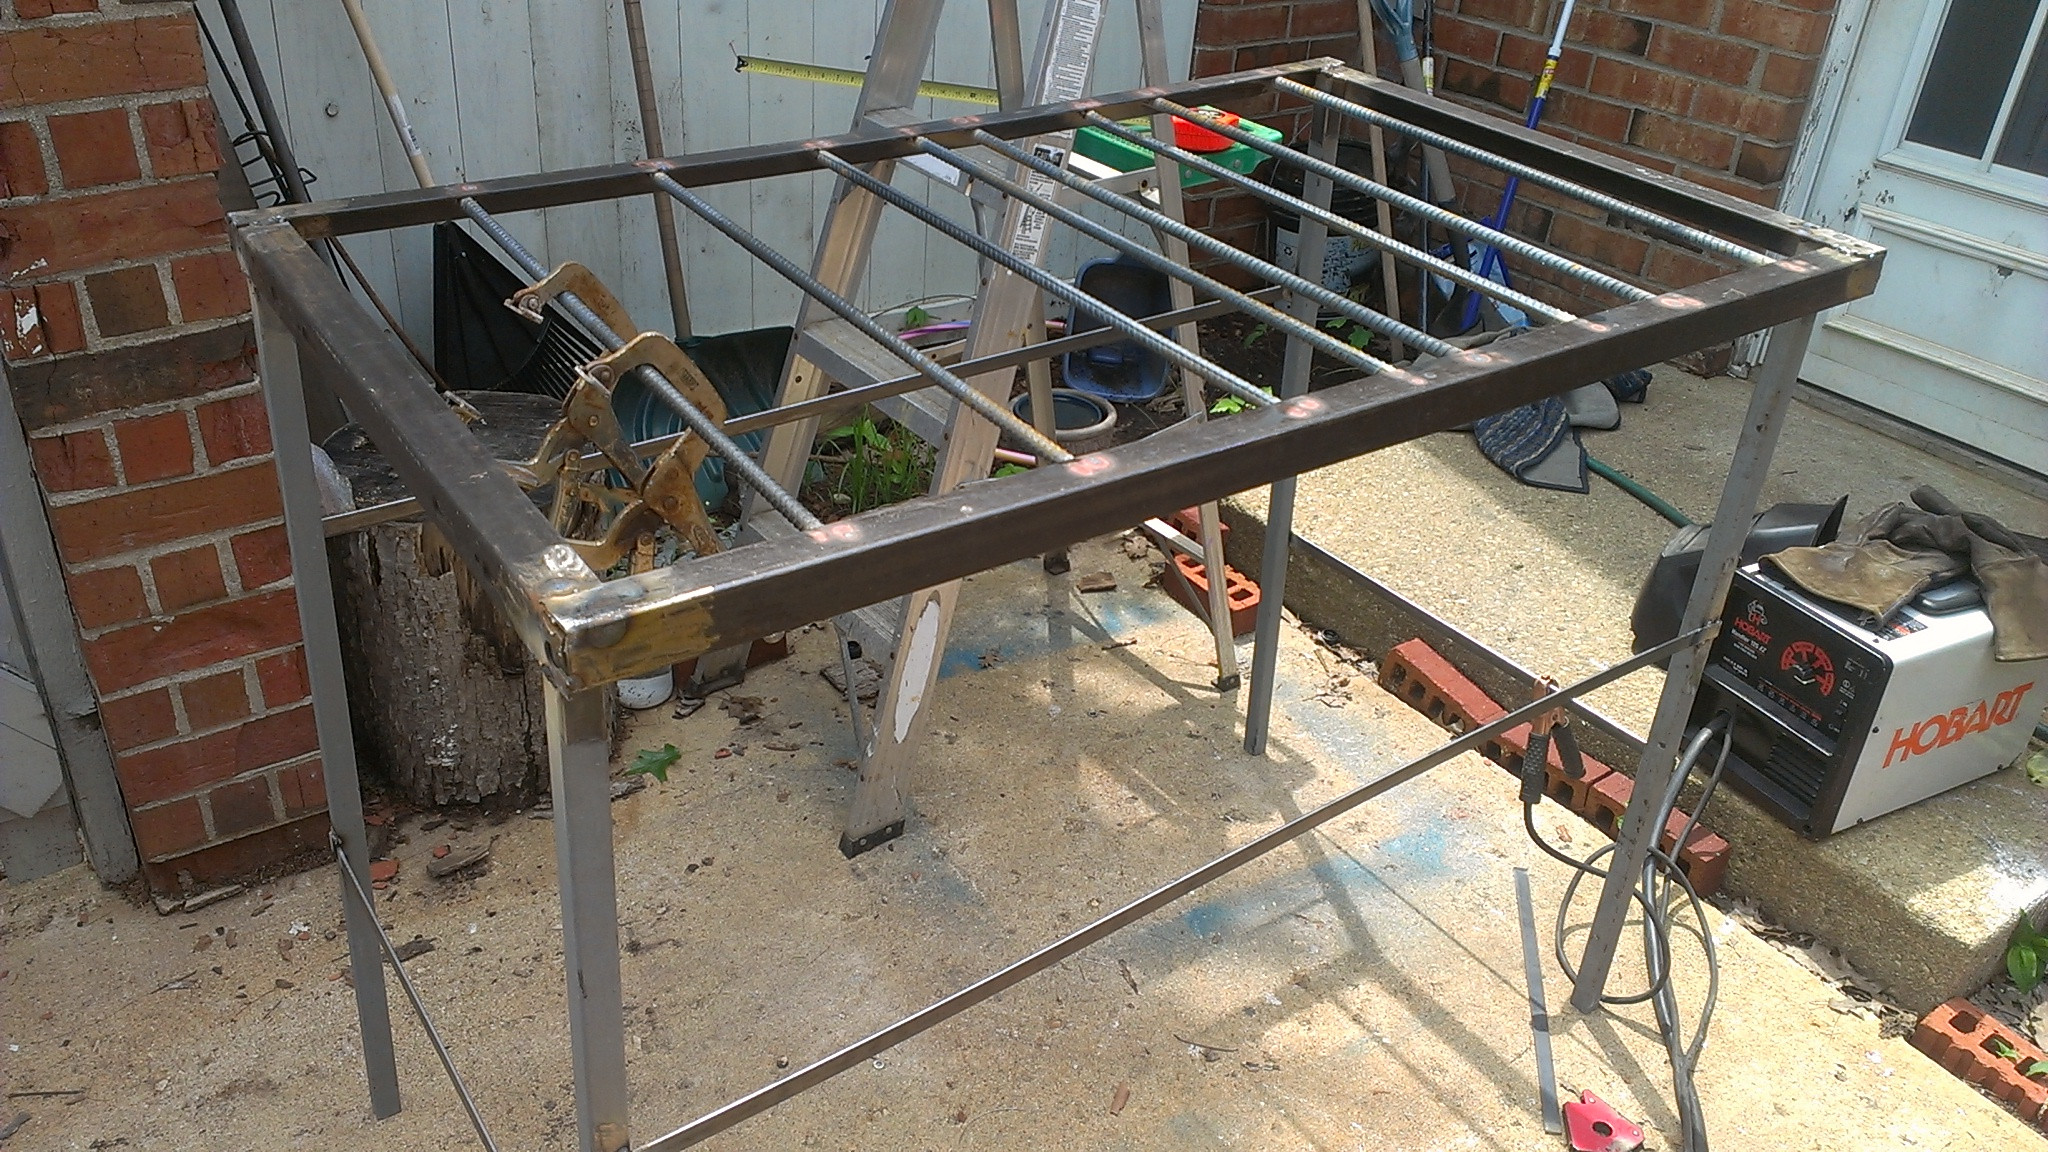 DIY Welding Table Plans
 Welding Table on the Cheap